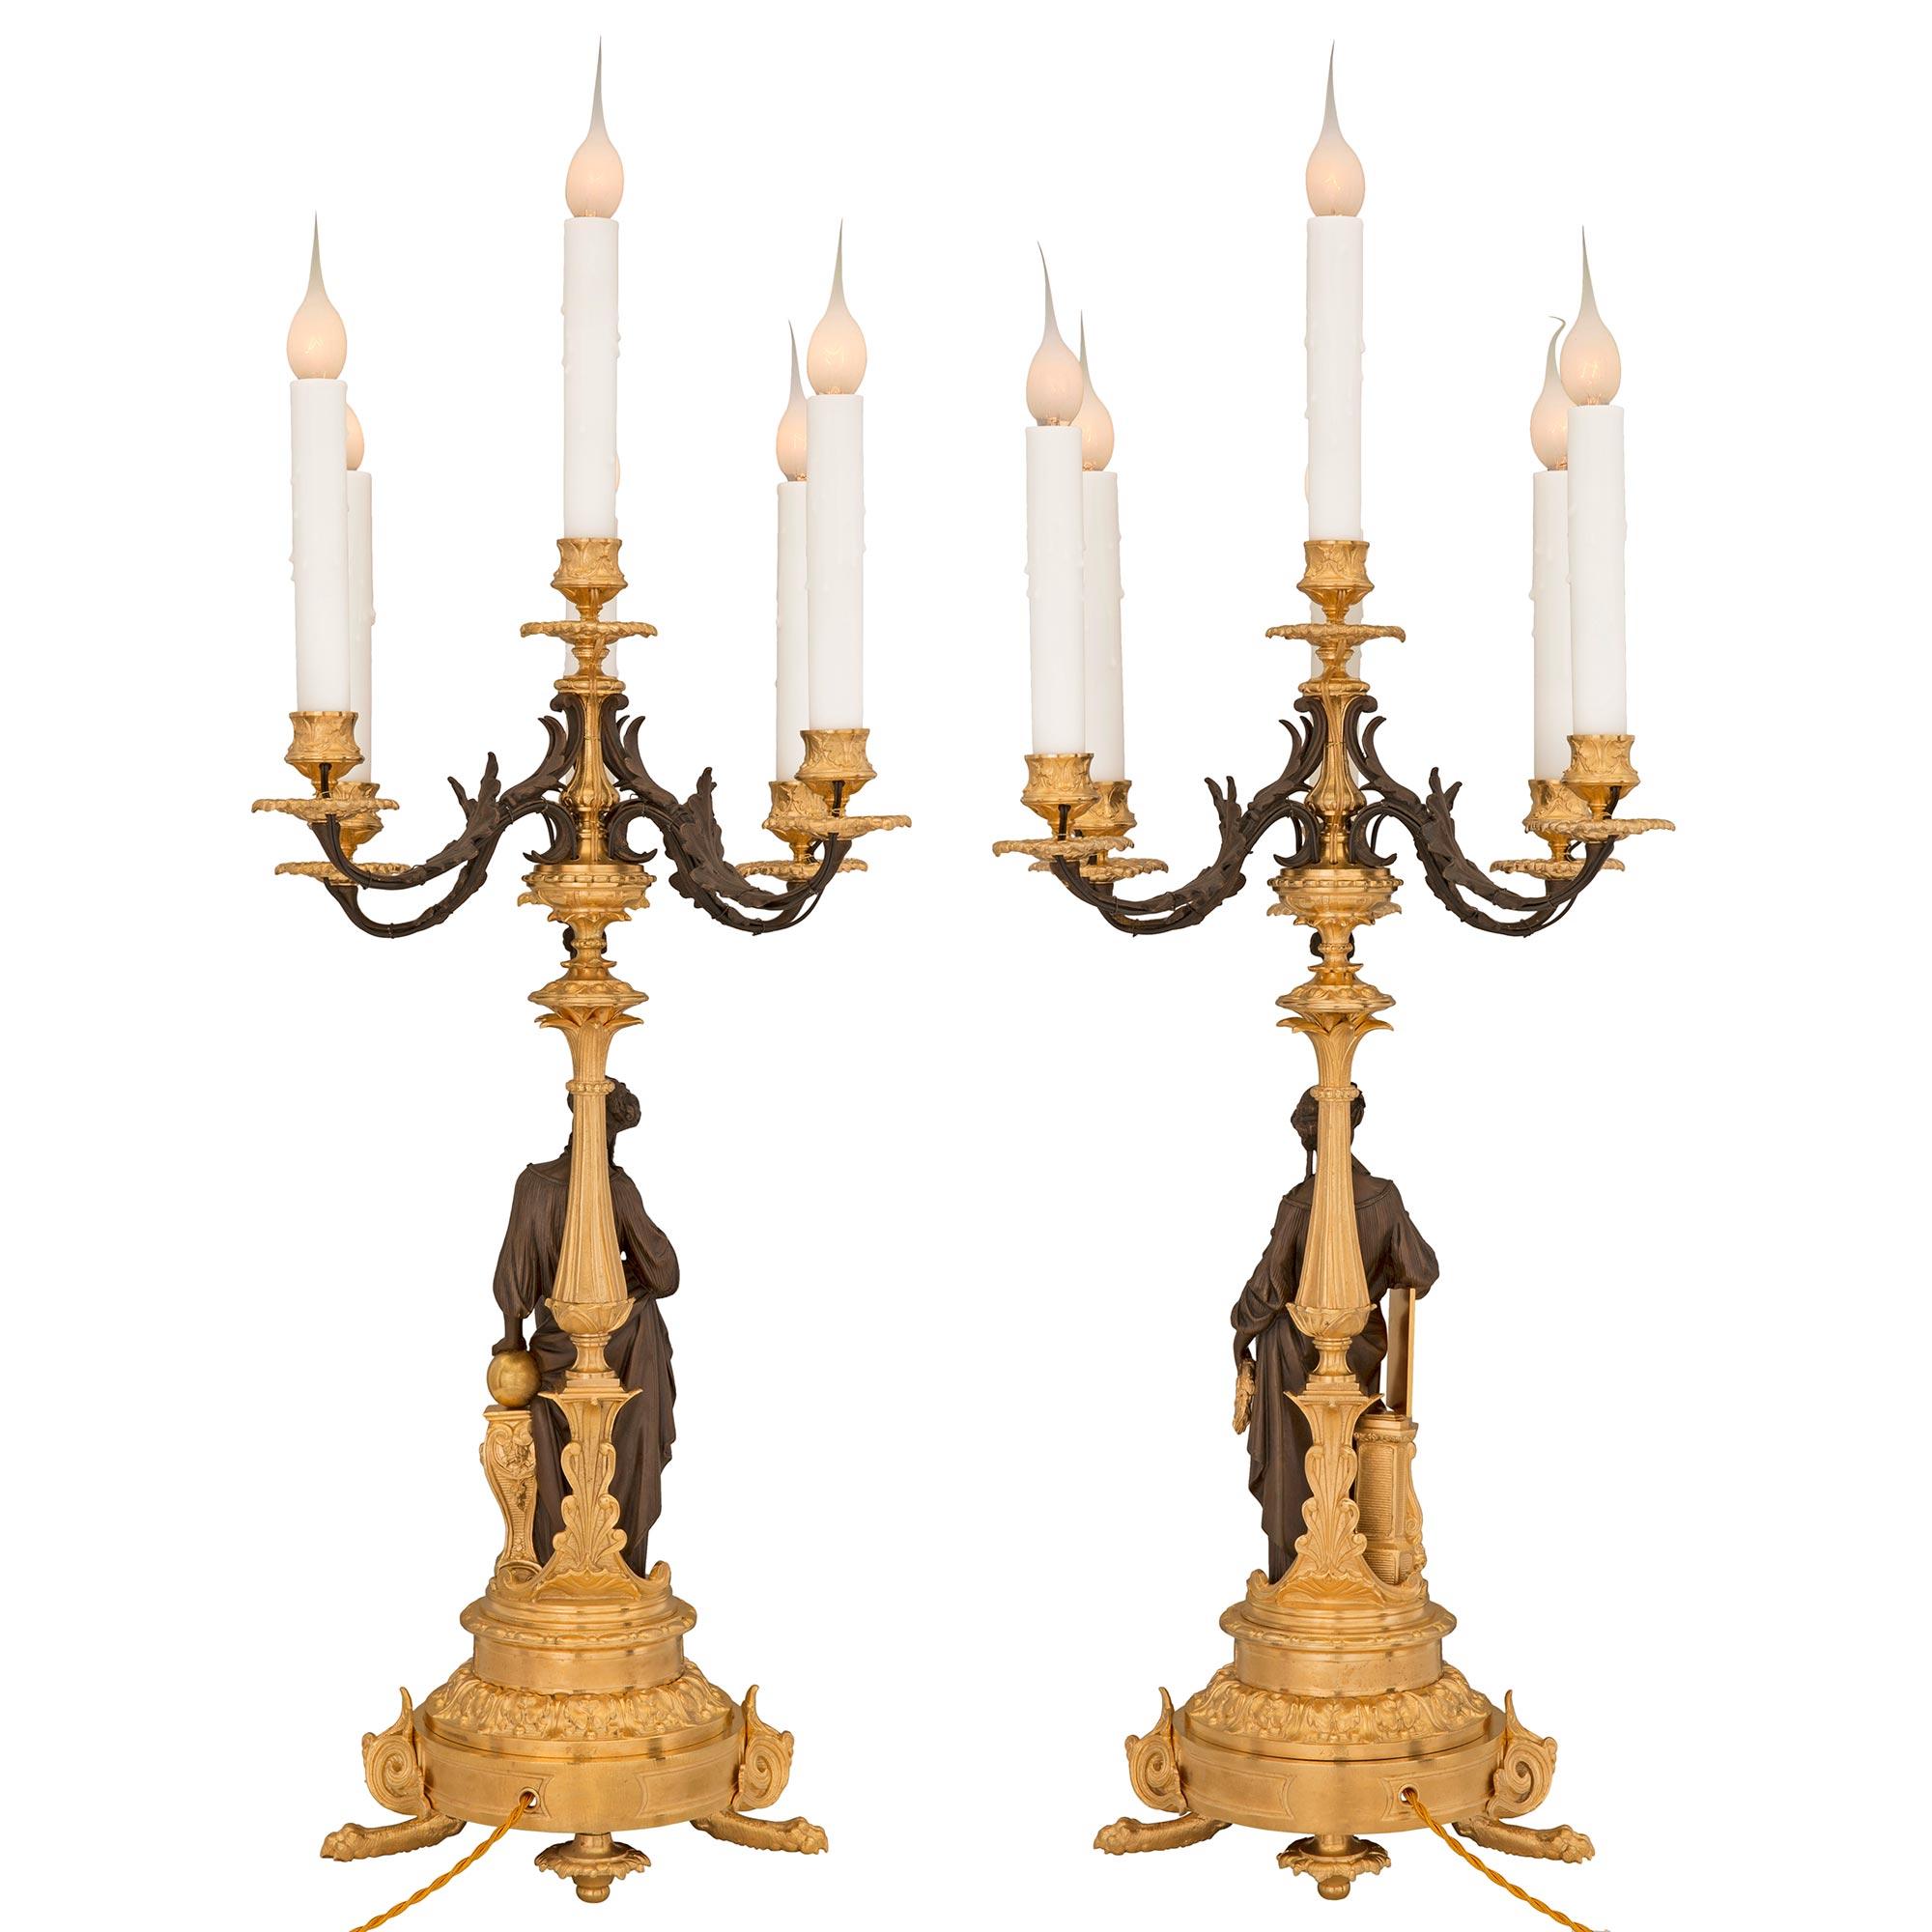 Pair of French 19th Century Renaissance St. Bronze and Ormolu Candelabra Lamps In Good Condition For Sale In West Palm Beach, FL